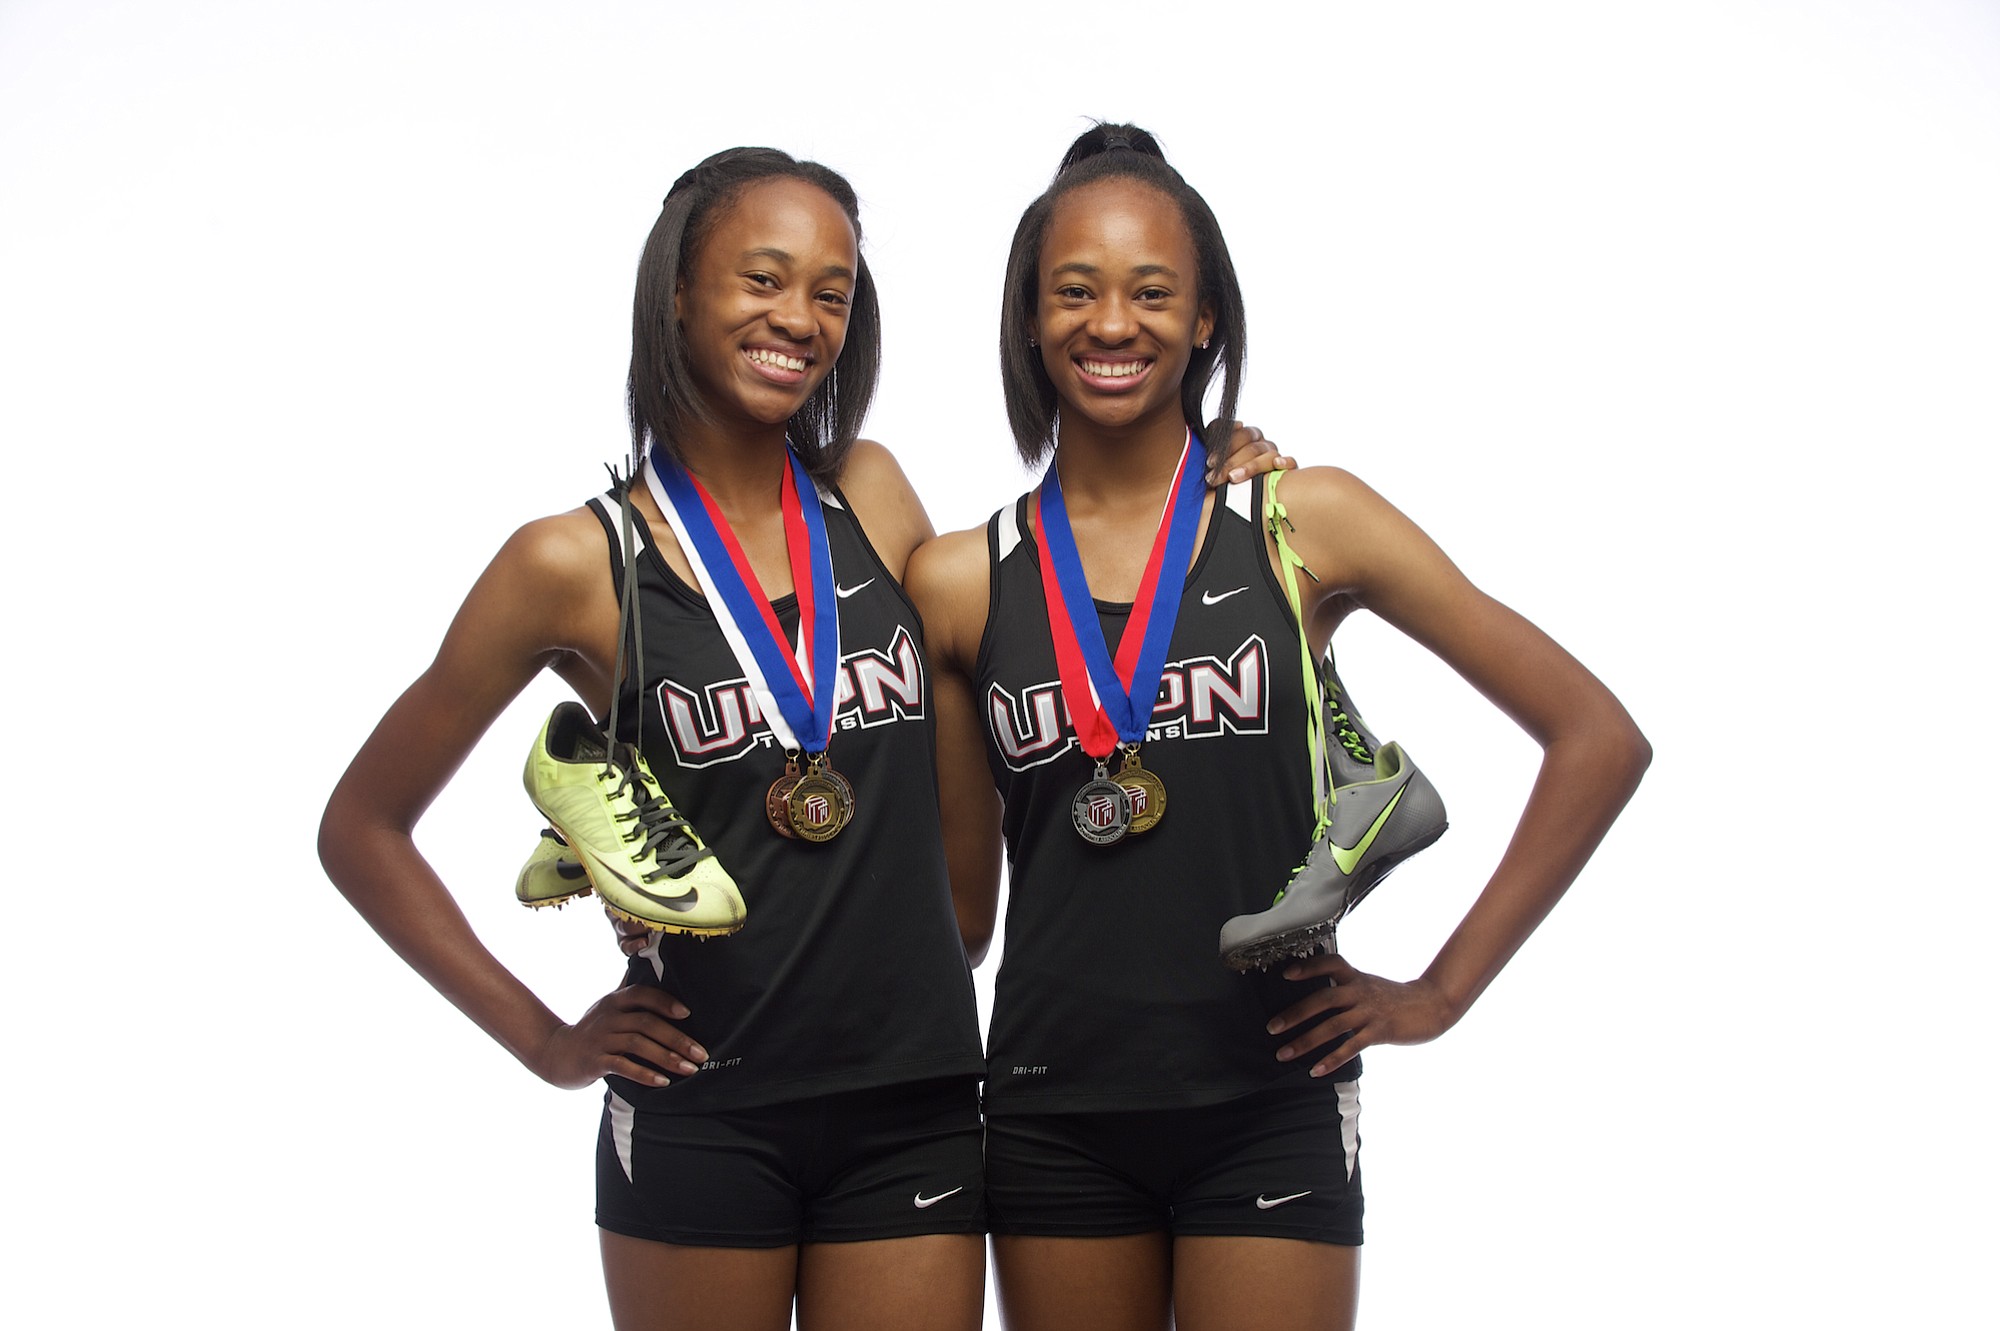 All-Region girls track athletes of the year, Jai'lyn, left, and Dai'lyn Merriweather of Union.